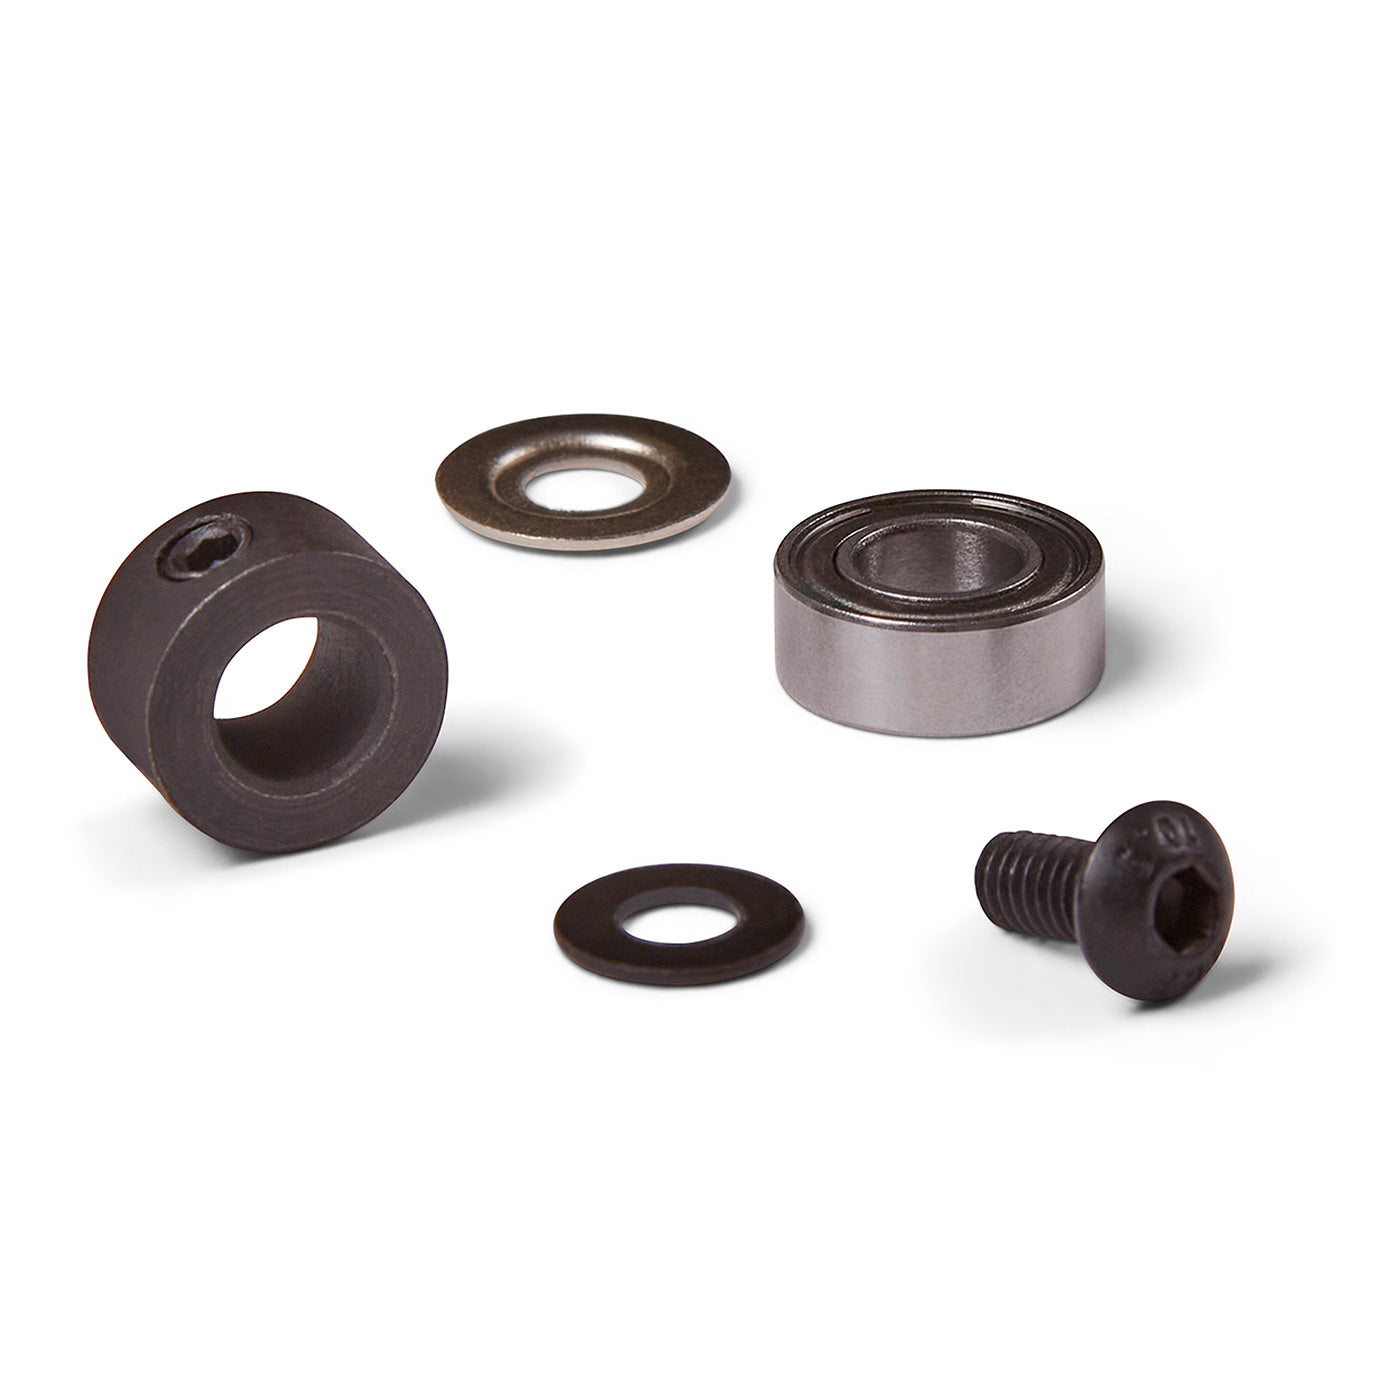 Bearing Kit for R5724, R5741 and R5742  